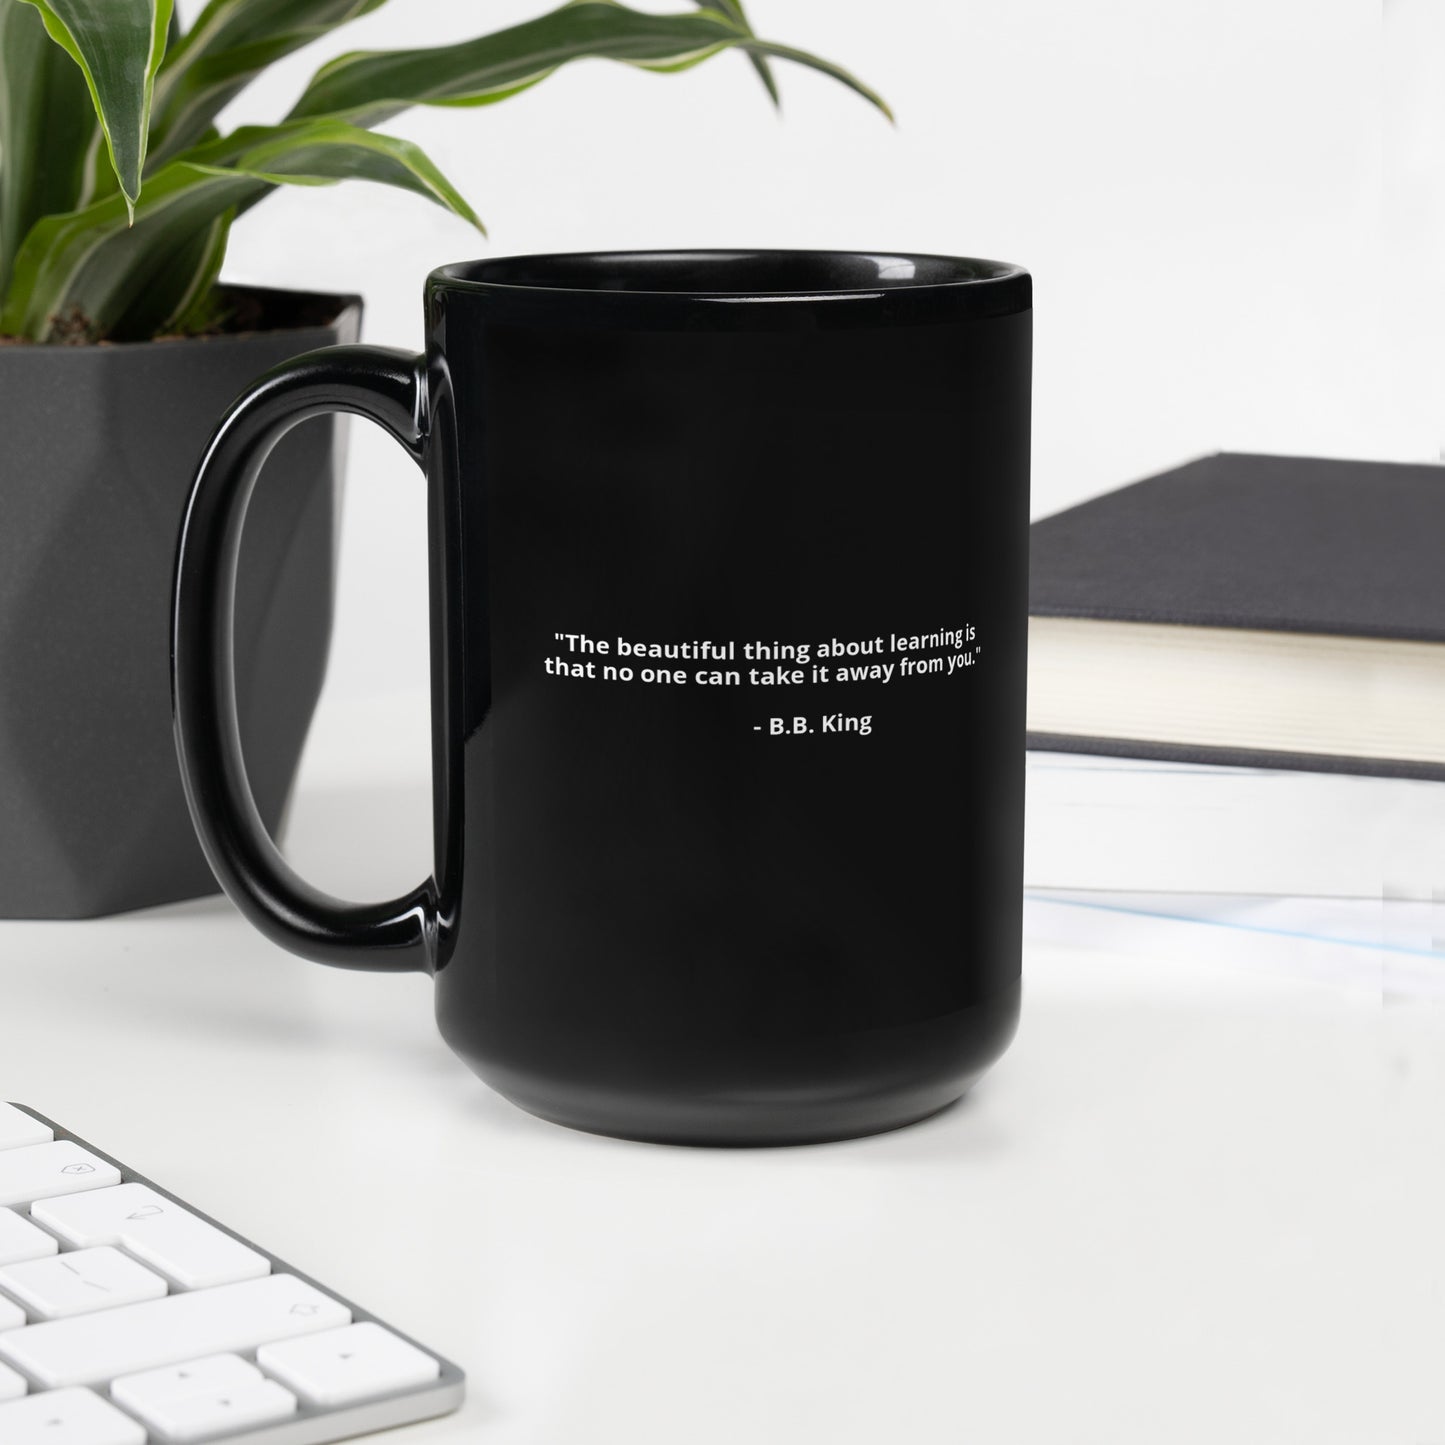 "The beautiful thing about learning is that no one can take it away from you." - B.B. King - Black Glossy Mug